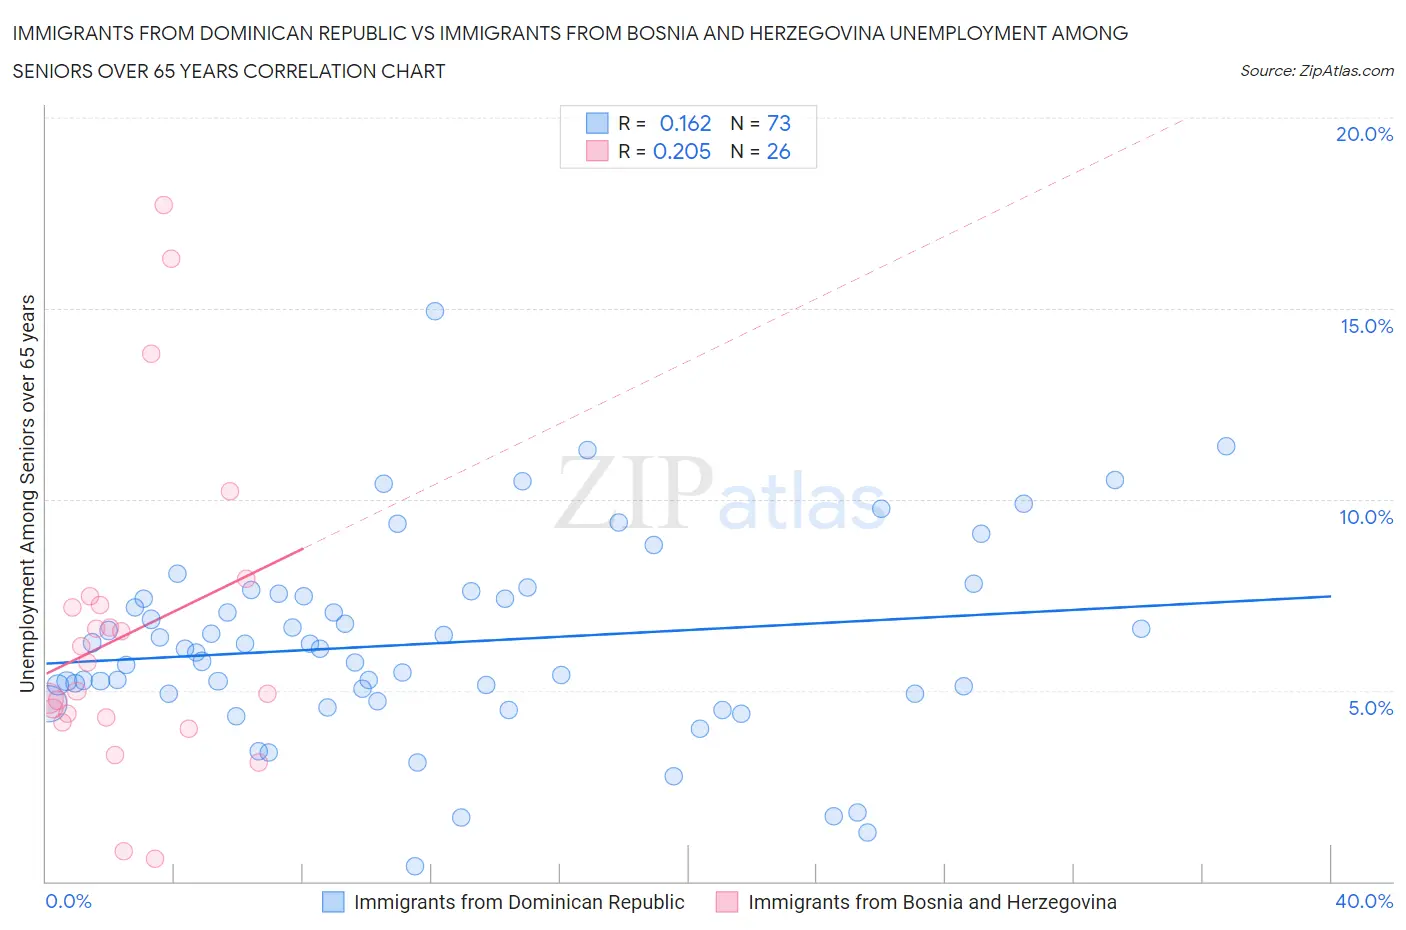 Immigrants from Dominican Republic vs Immigrants from Bosnia and Herzegovina Unemployment Among Seniors over 65 years